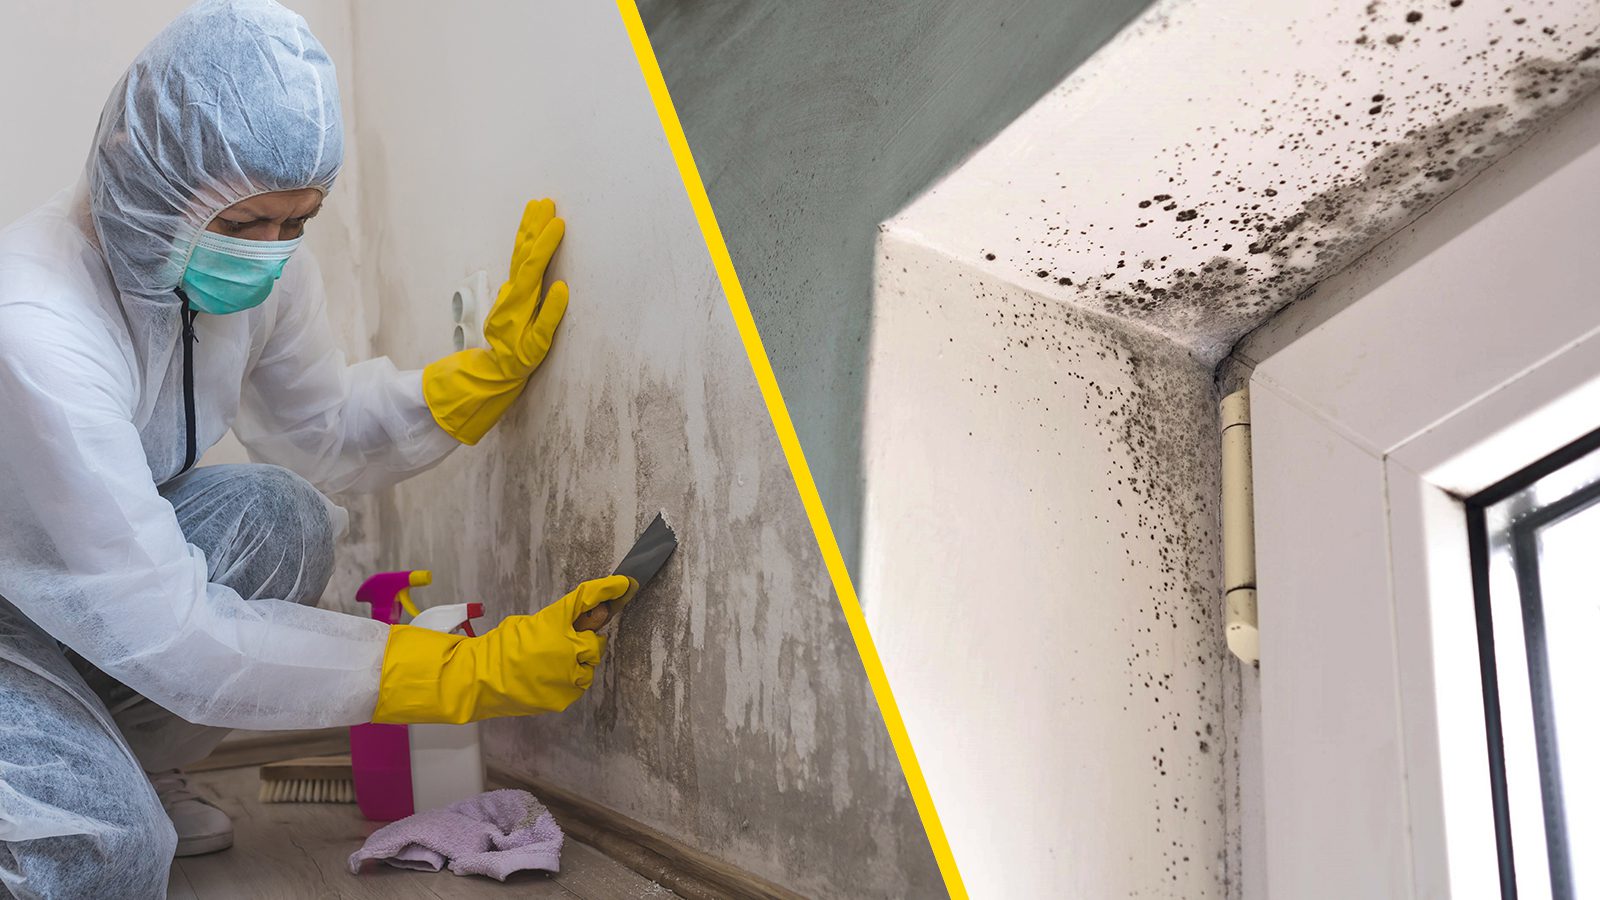 11 Tips for Mold Detox, According to Science